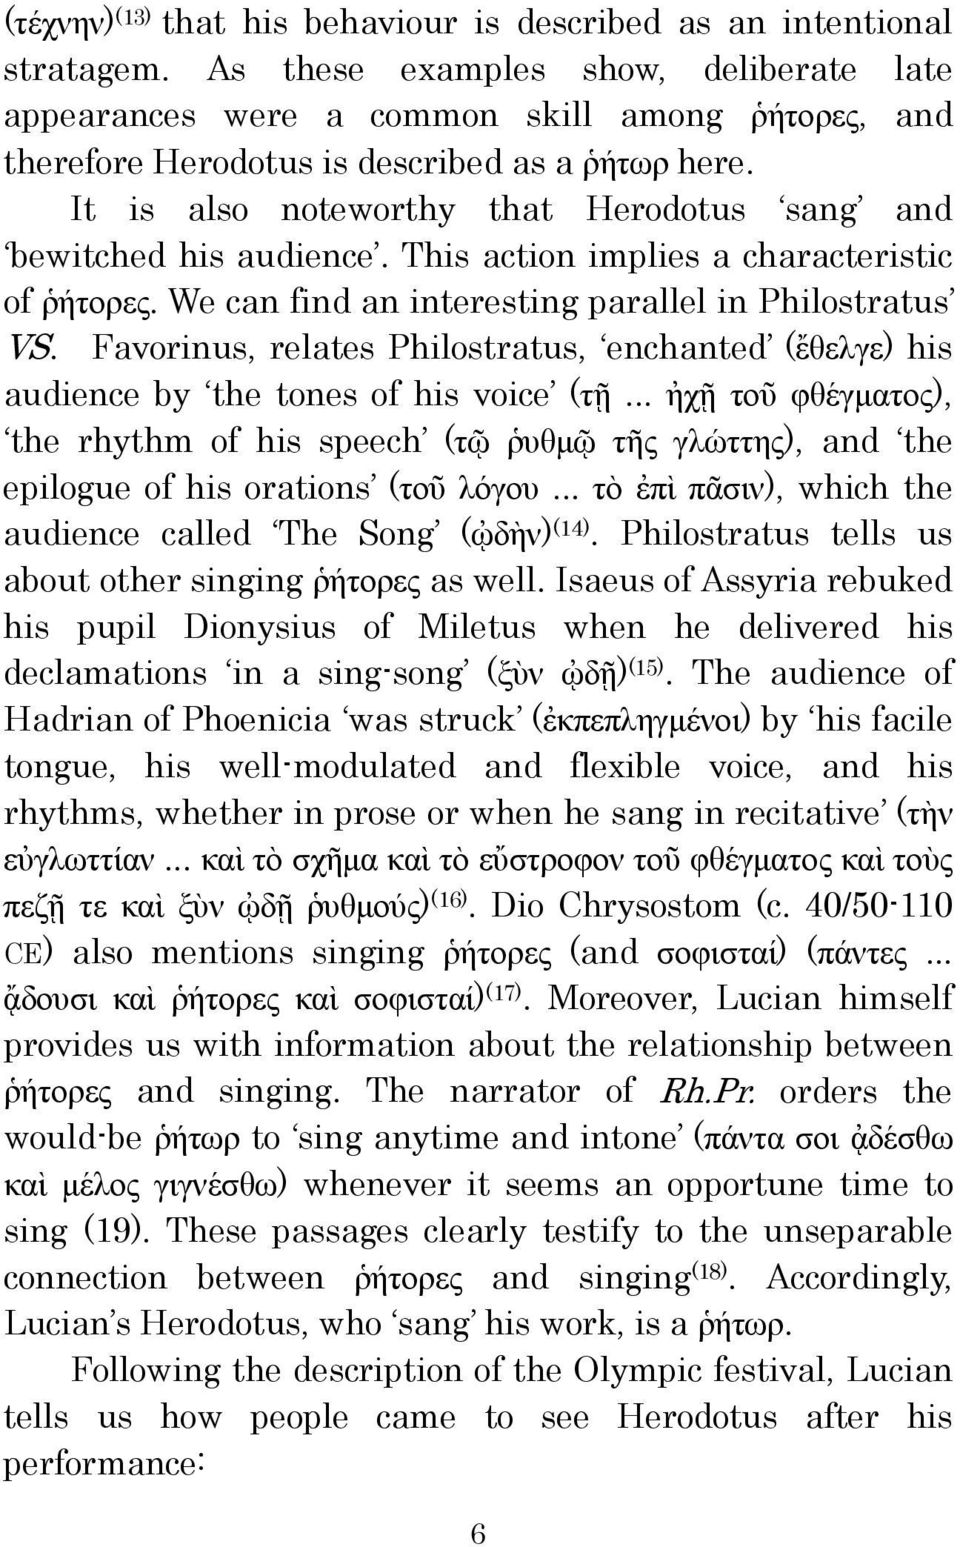 It is also noteworthy that Herodotus sang and bewitched his audience. This action implies a characteristic of ῥήτορες. We can find an interesting parallel in Philostratus VS.